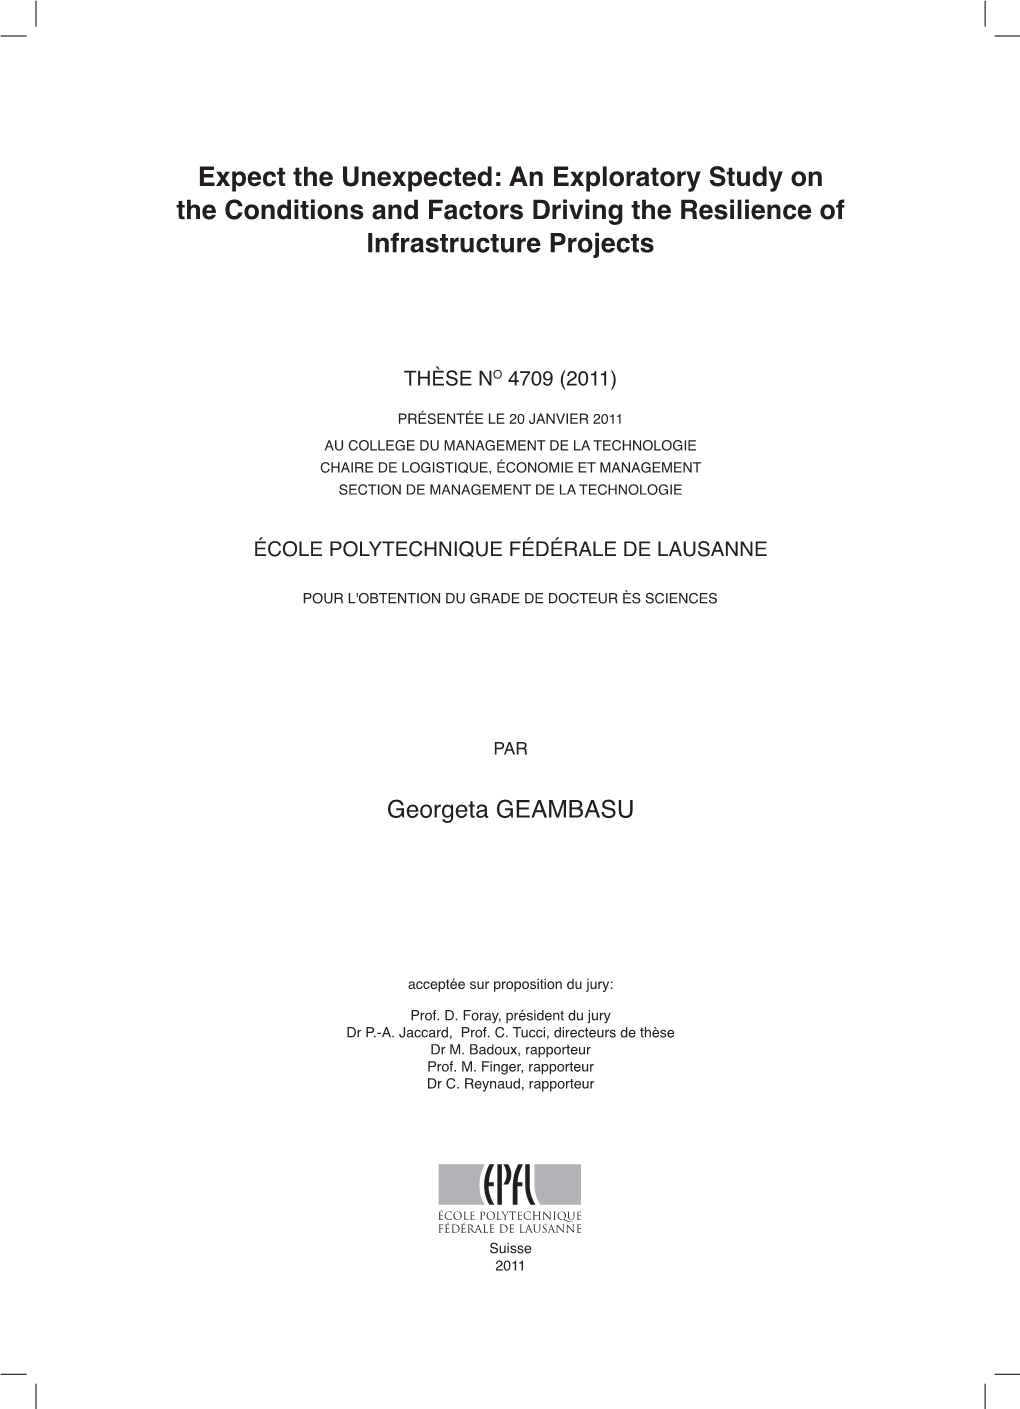 An Exploratory Study on the Conditions and Factors Driving the Resilience of Infrastructure Projects